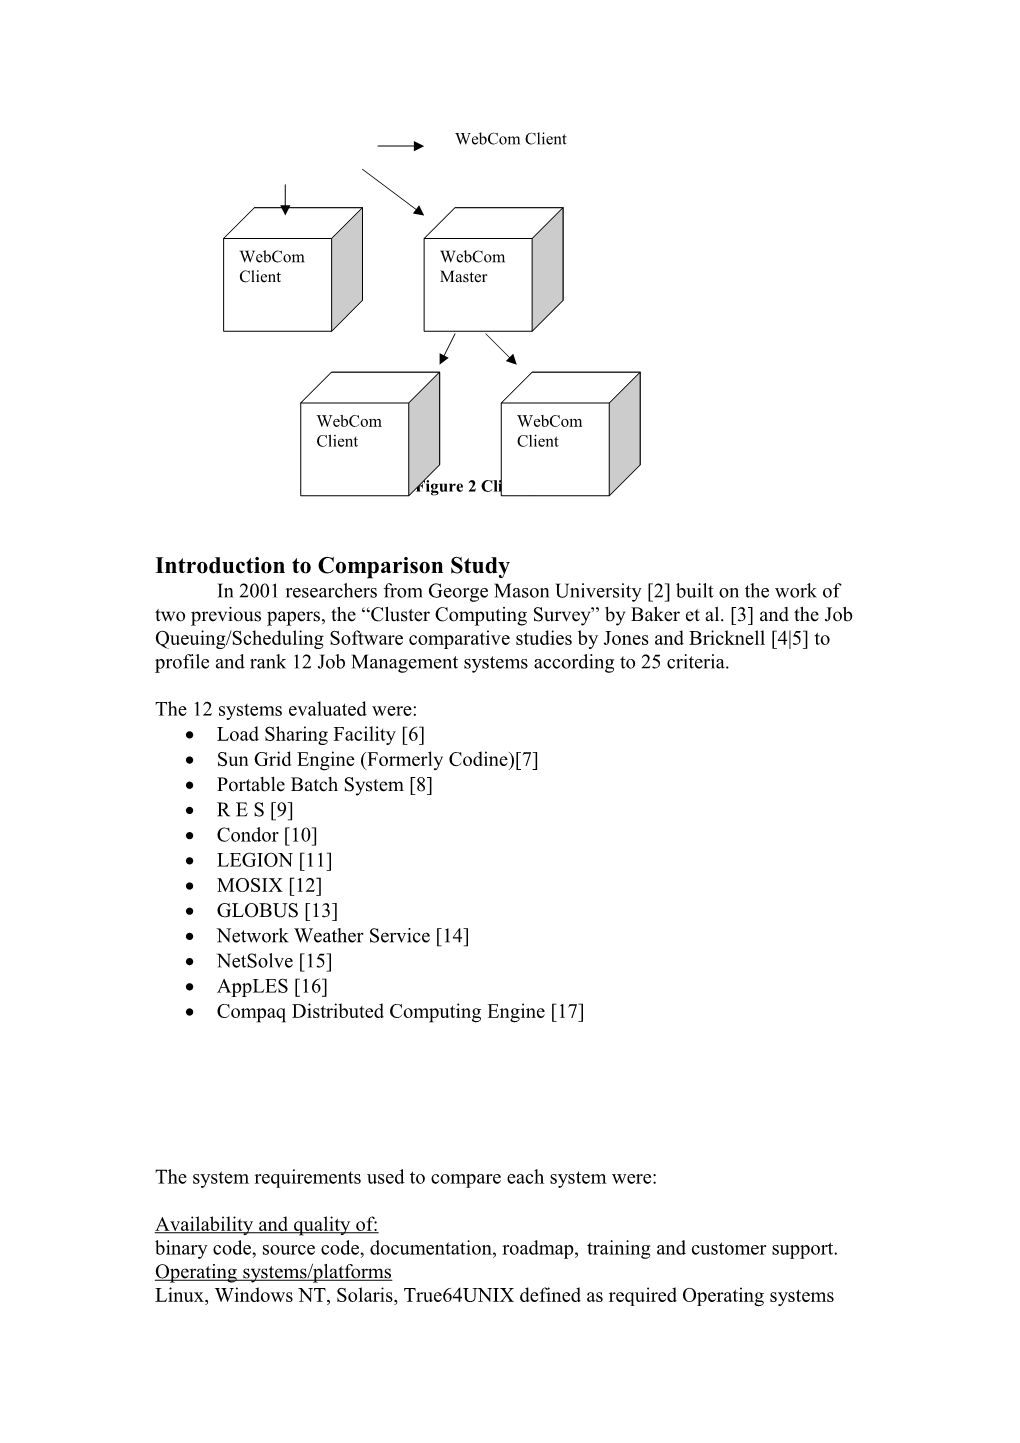 Table 1 Summary of Features of Compared Systems Related to the Operating System, Flexibility